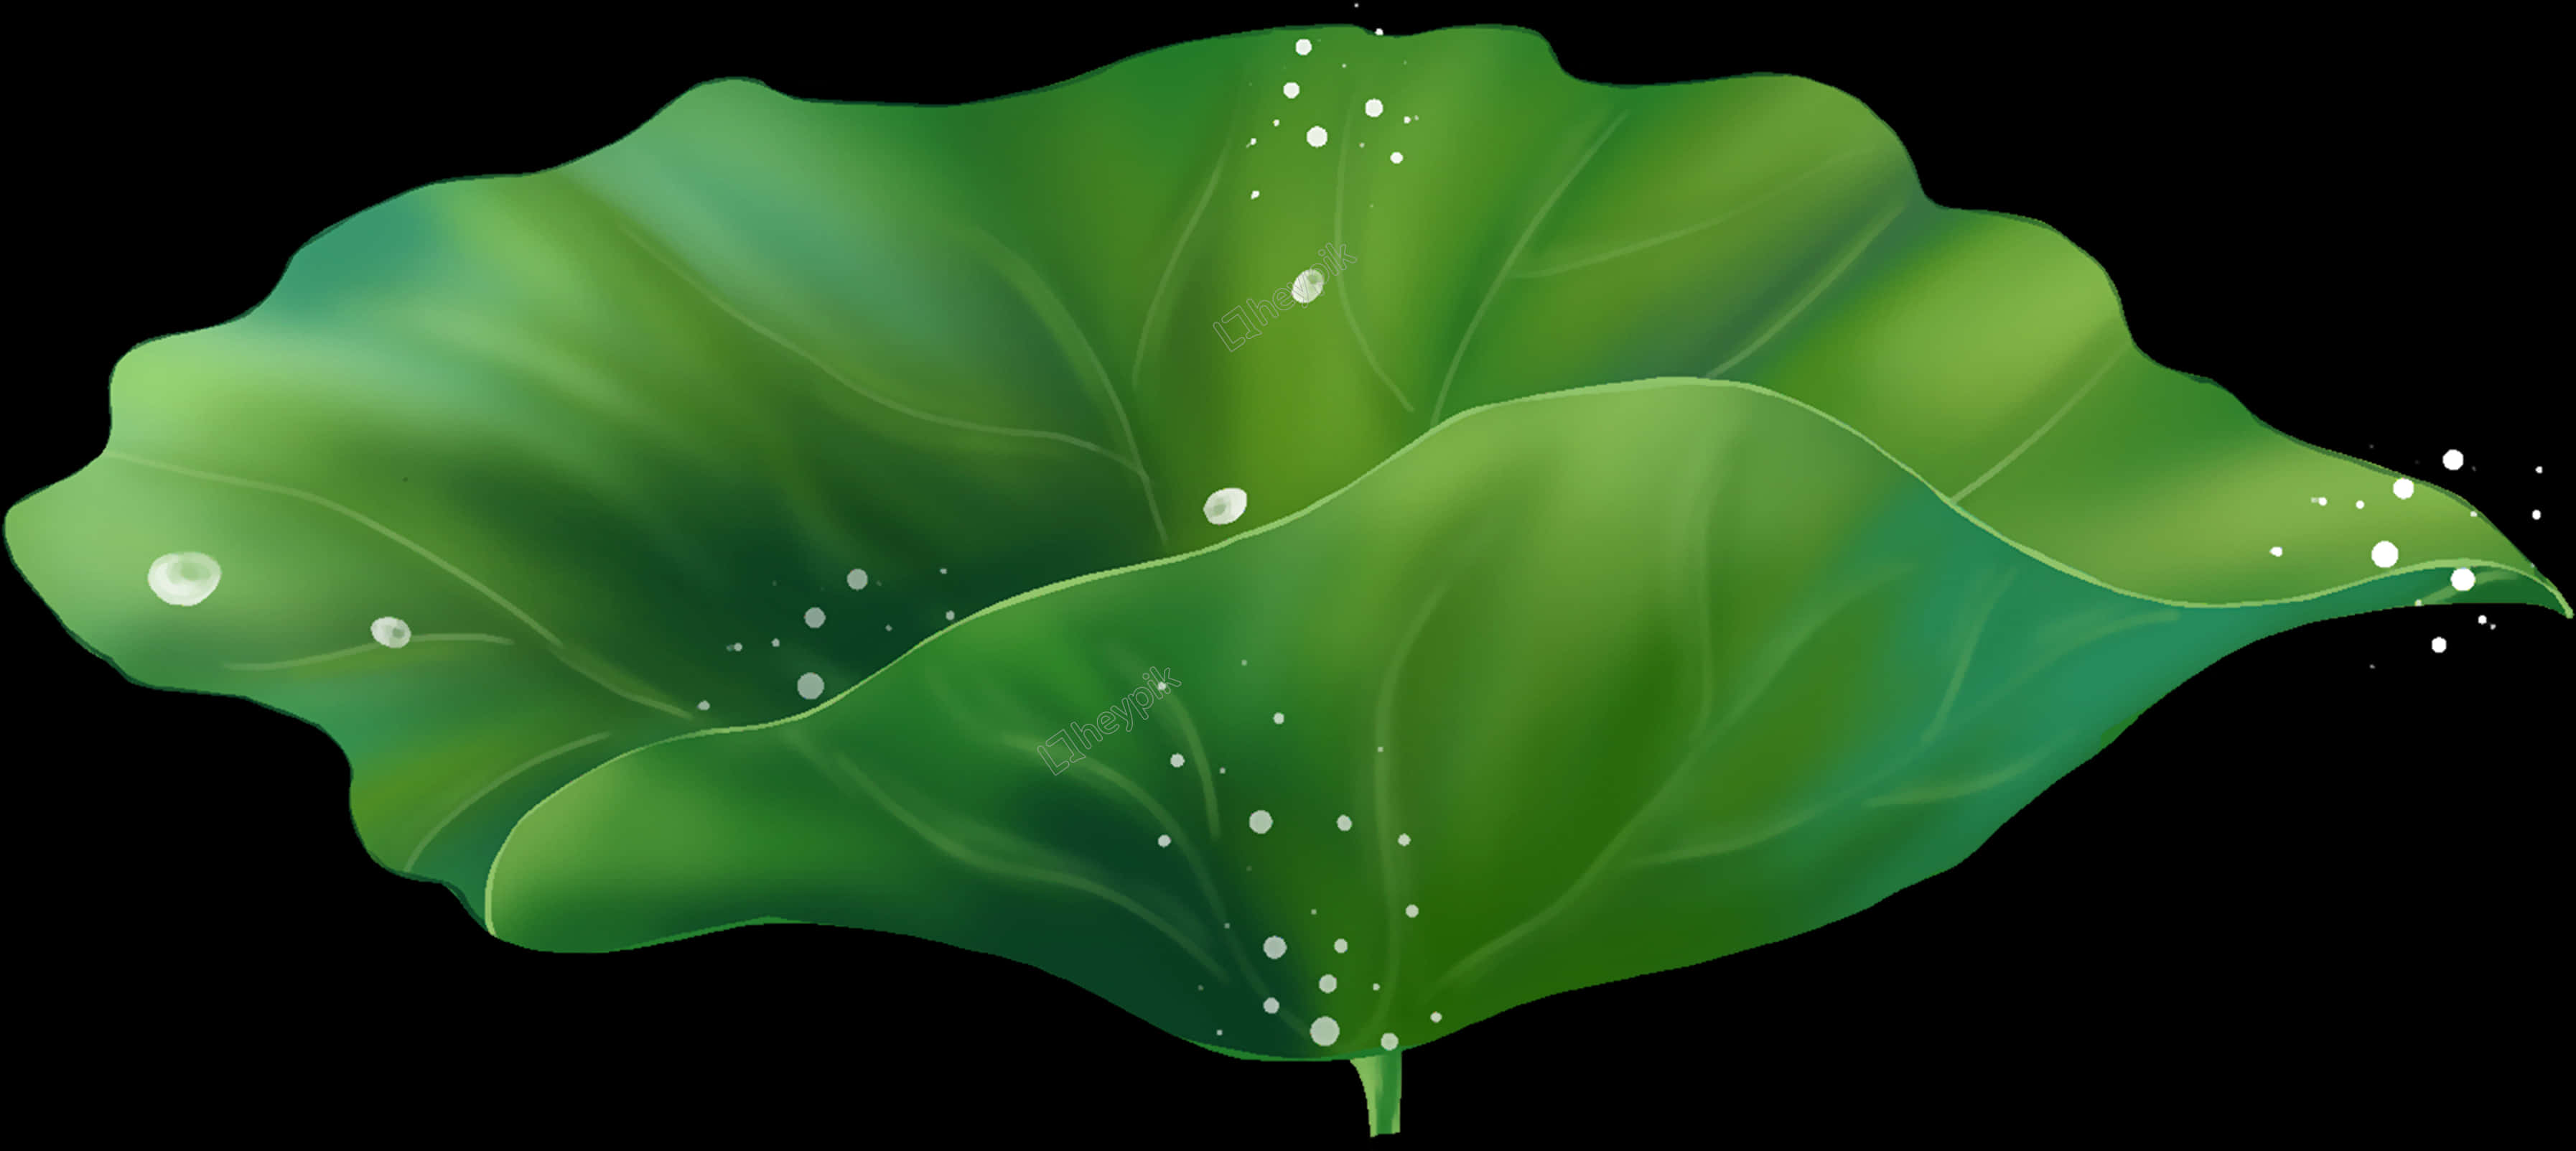 Green Lotus Leafwith Dew Drops PNG